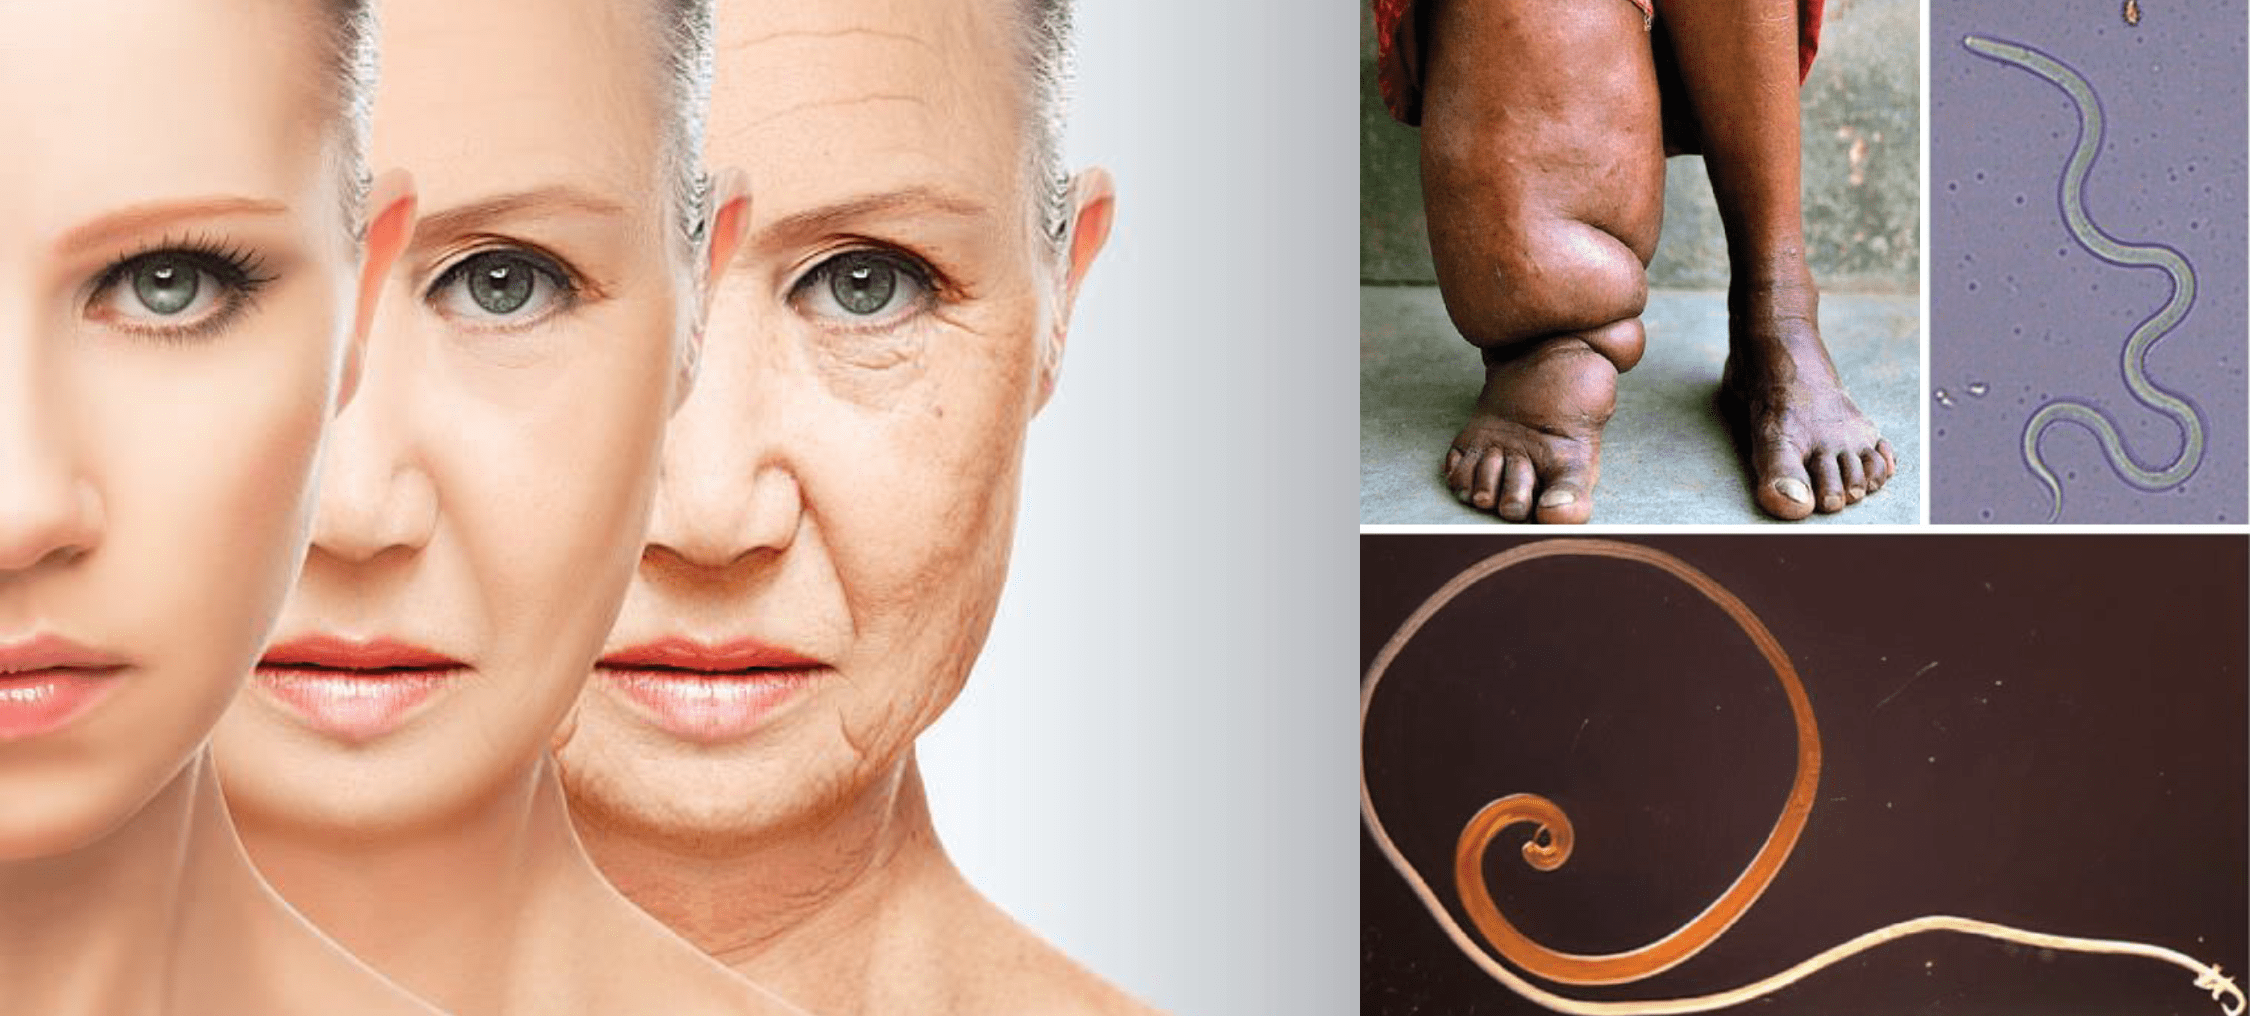 woman ageing and a parasitic worm